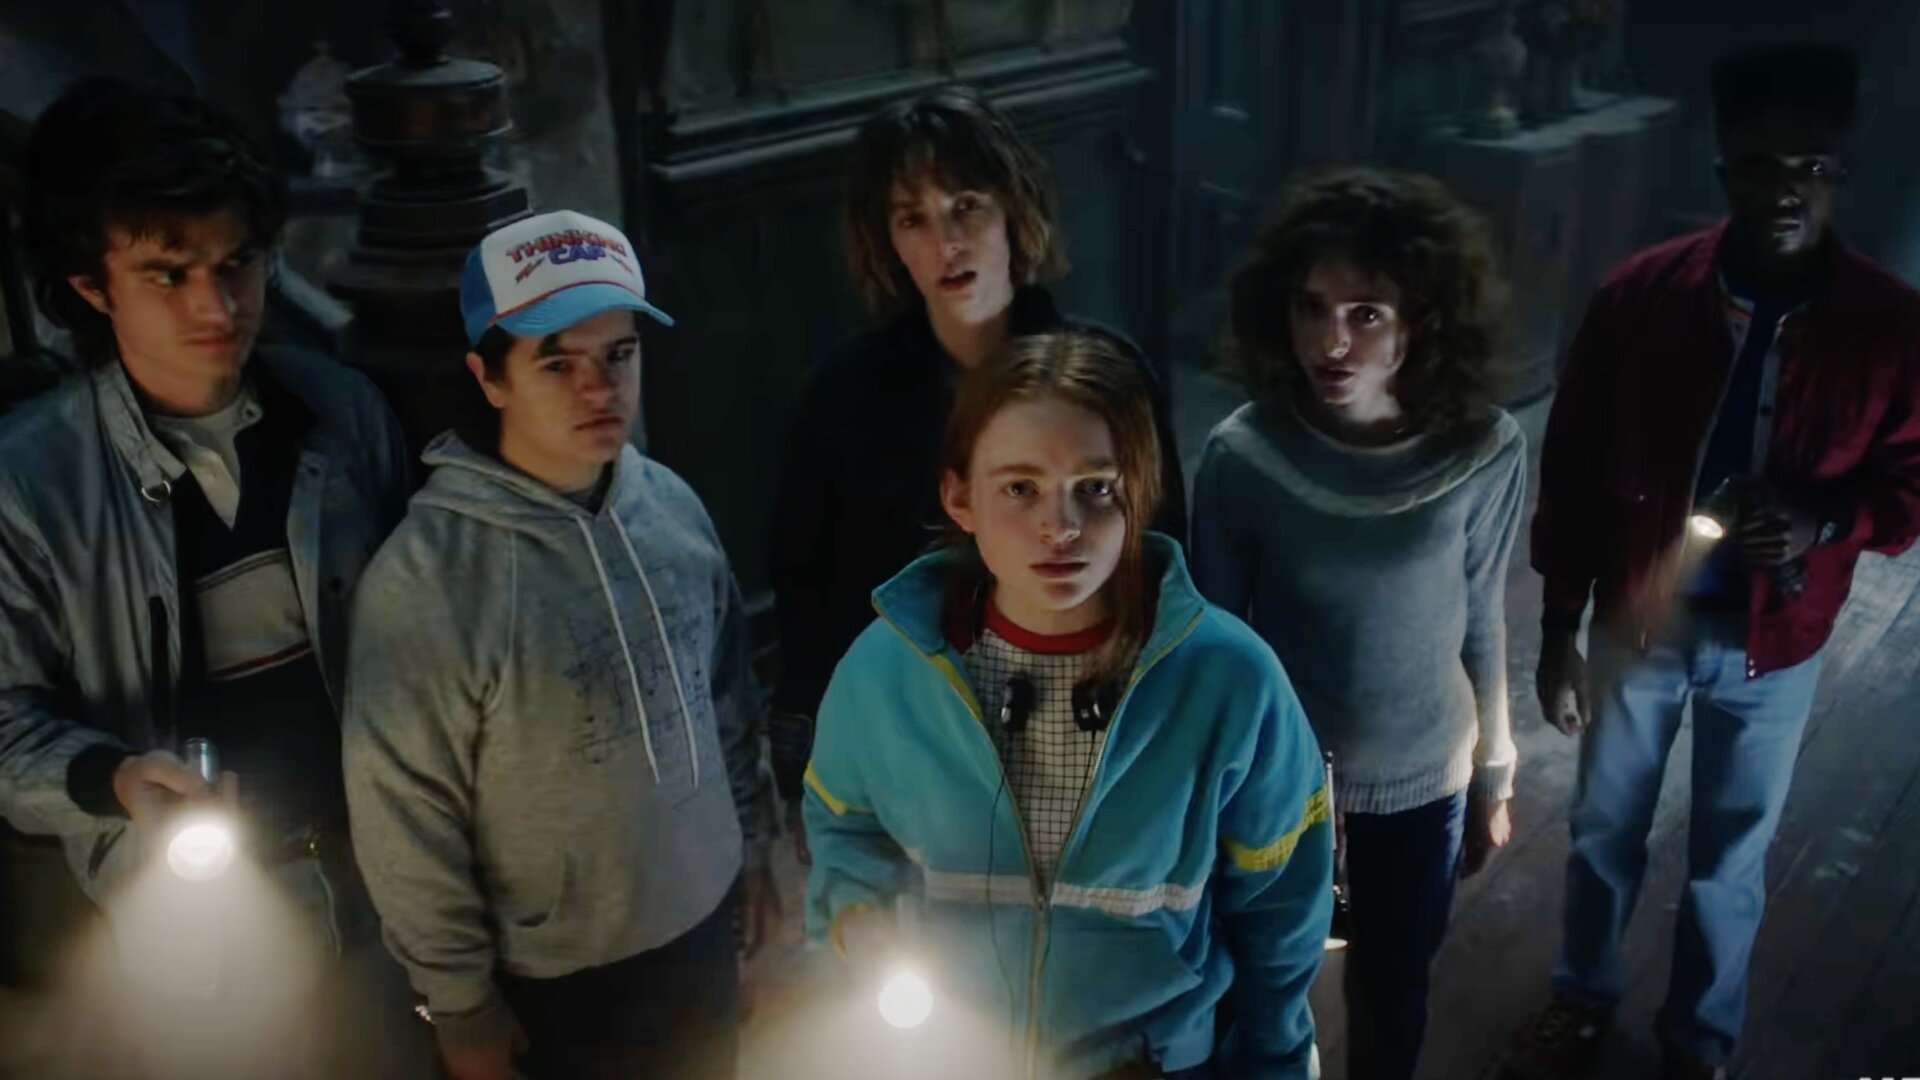 Stranger Things Season 4 Part 2 Release Date and Time: When do